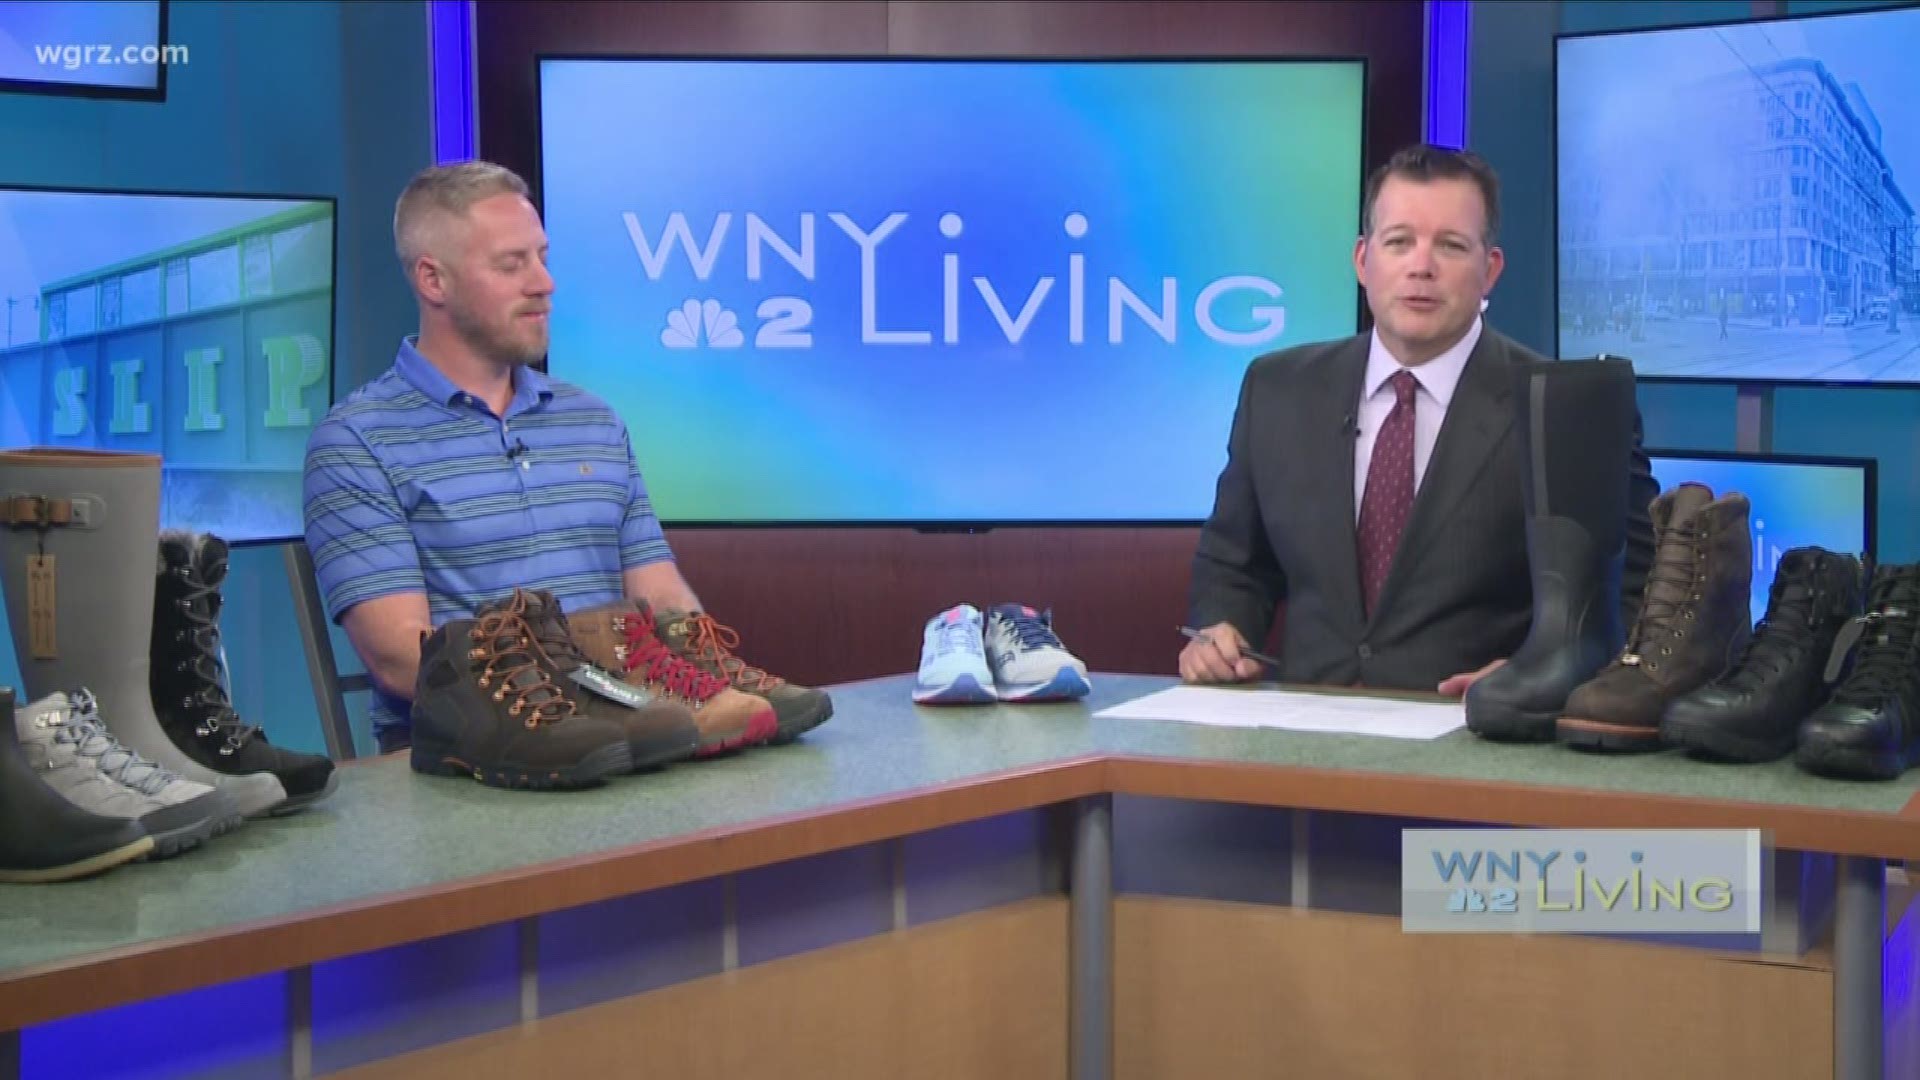 WNY Living - November 9 - Route 5 Boots and Shoes (THIS VIDEO IS SPONSORED BY ROUTE 5 BOOTS AND SHOES)